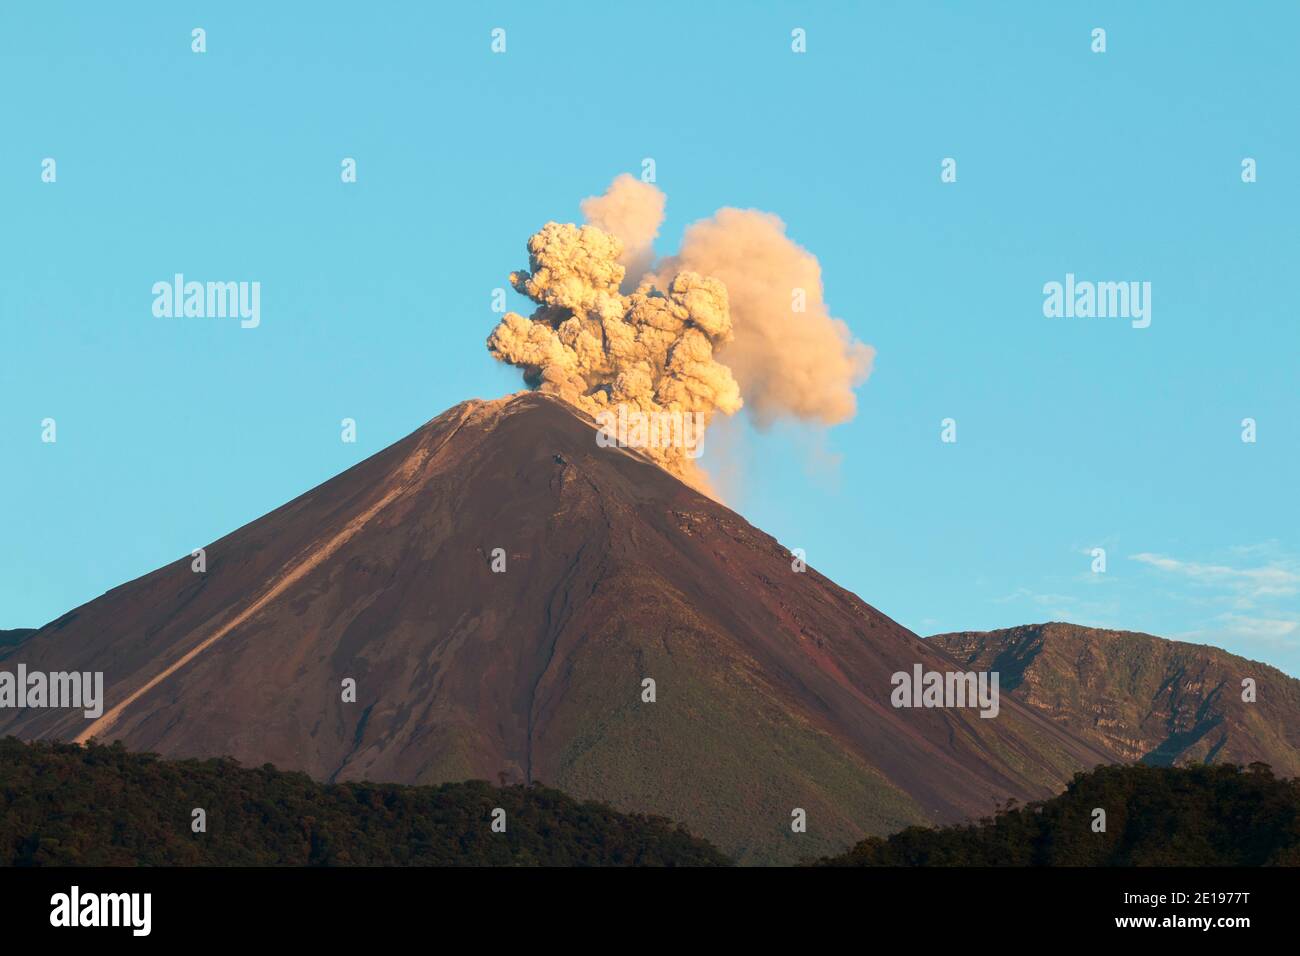 Reventador Volcano erupting at dawn, August 2016. The mountain is situated in a remote part of the Ecuadorian Amazon surrounded by rainforest. Stock Photo